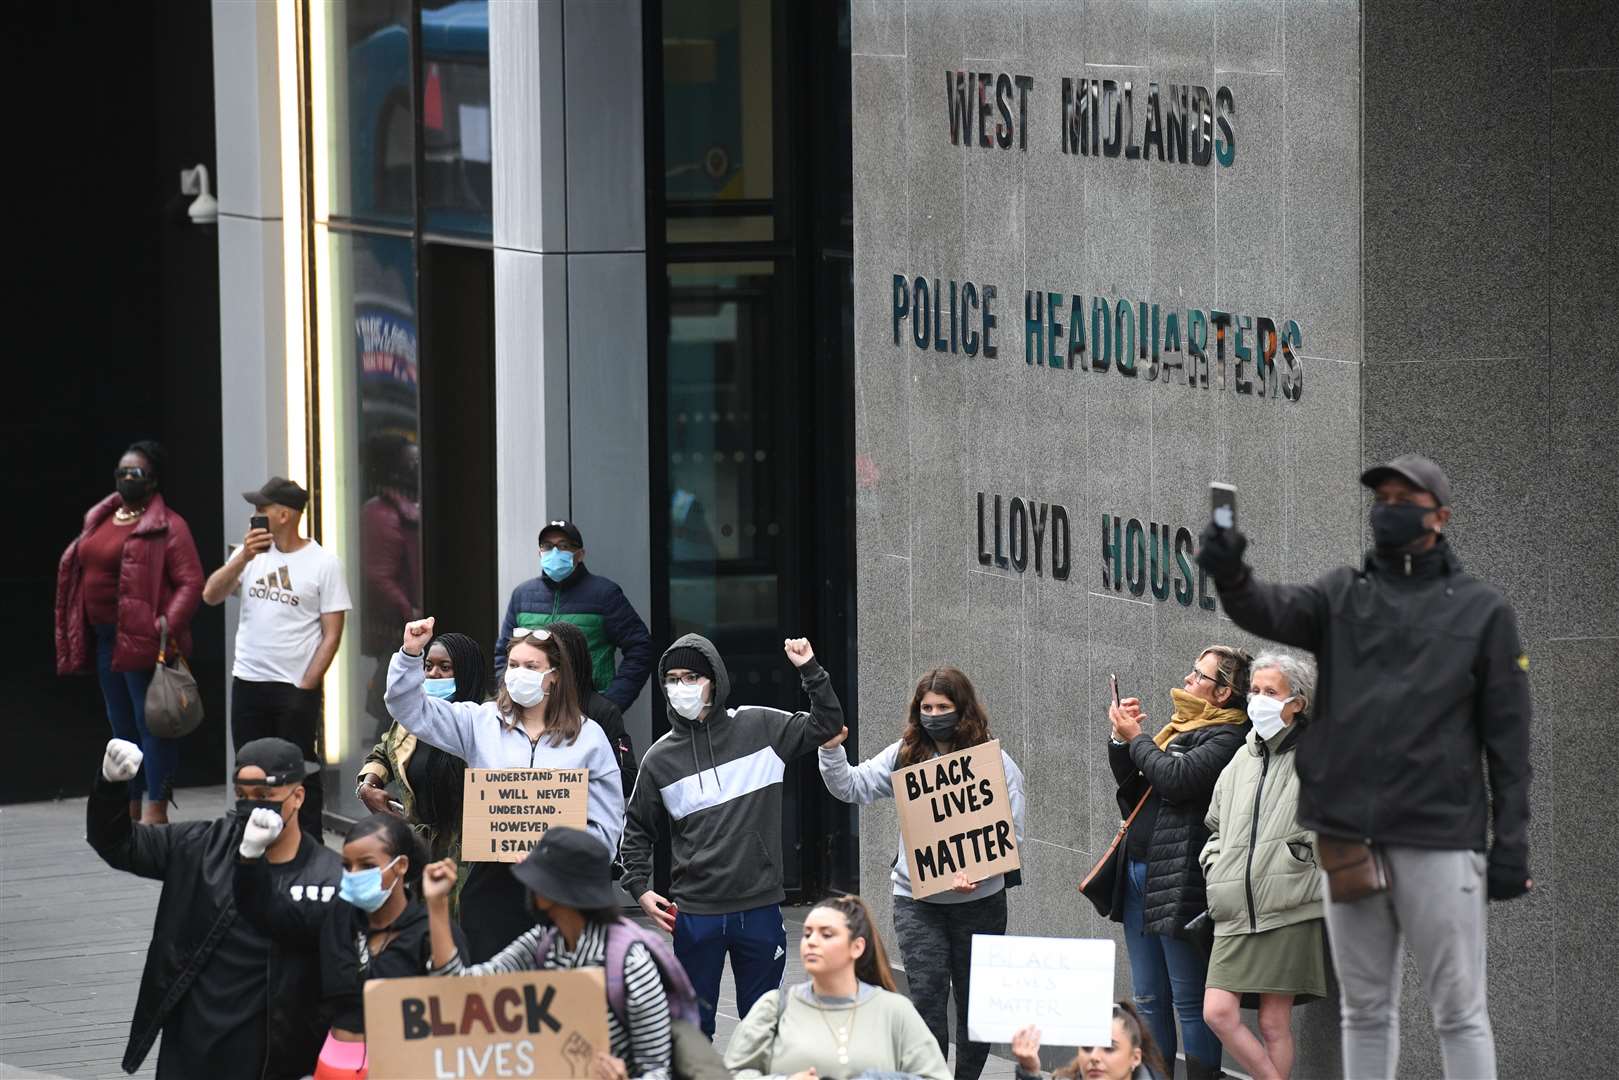 People gather outside the West Midlands Police headquarters during a Black Lives Matter protest rally in Birmingham (Joe Giddens/PA)